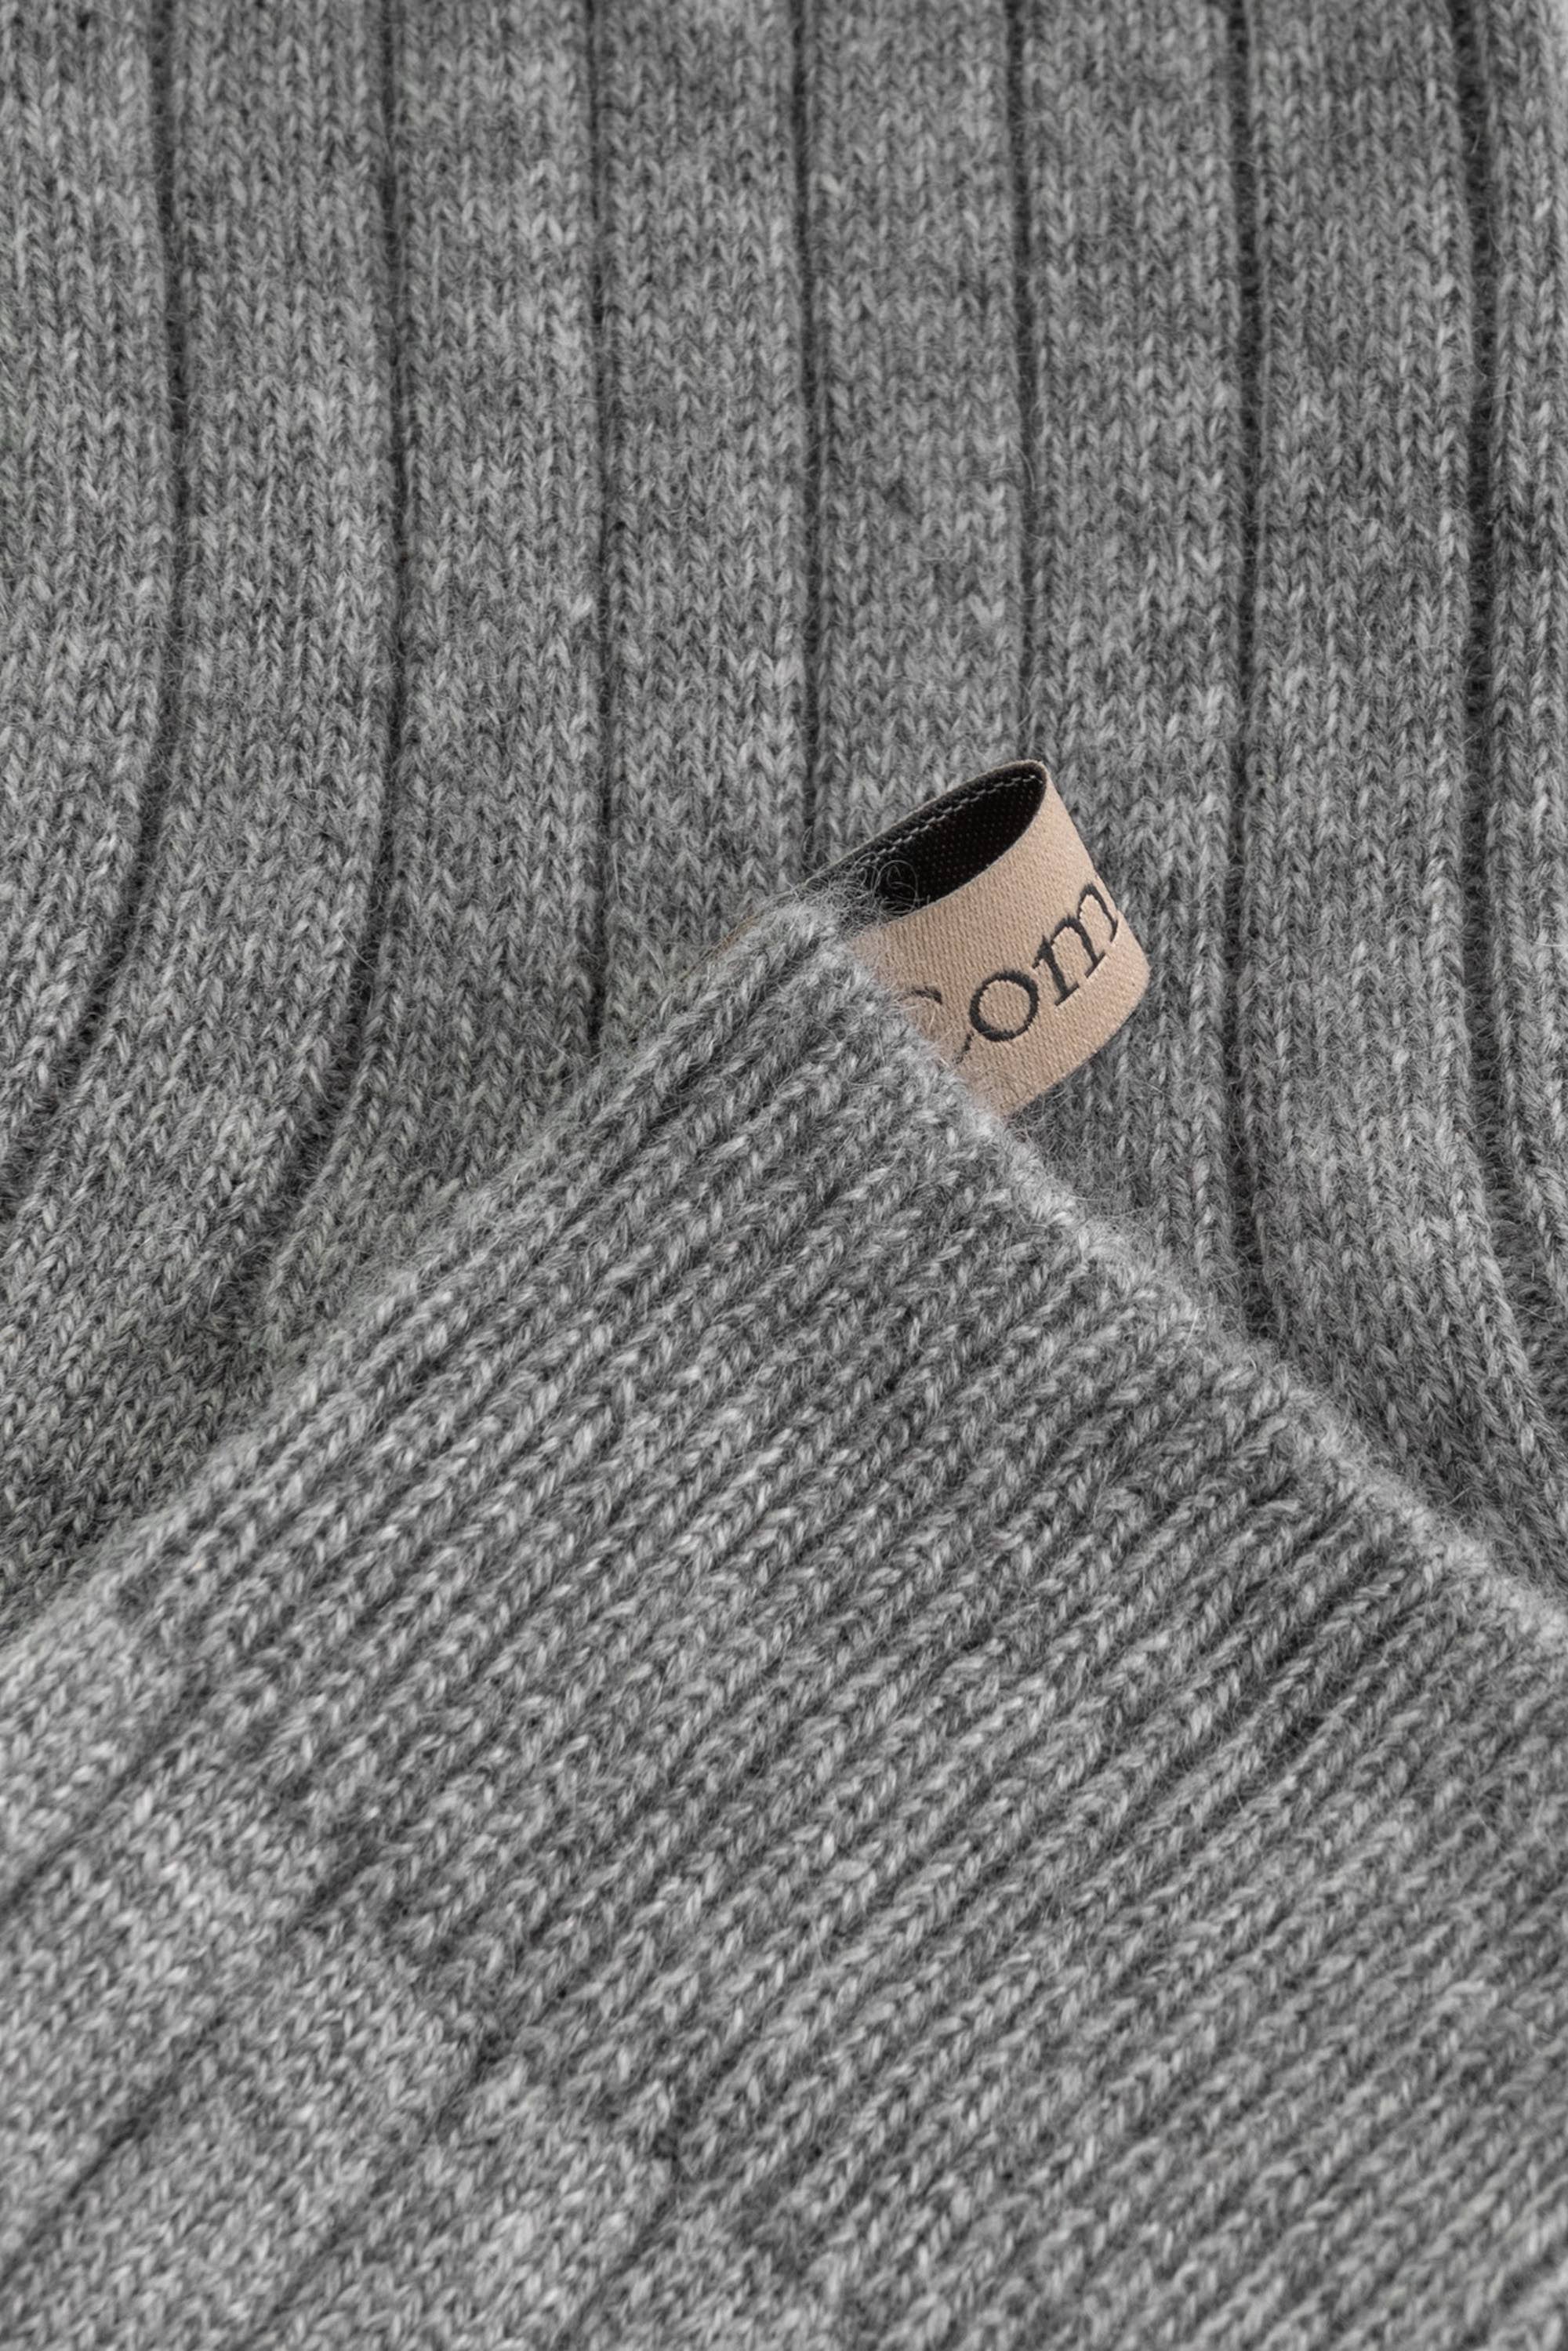 Ribbon Tag Detail, The Danielle Sock, Mongolian Cashmere, Heather Grey, Comme Si